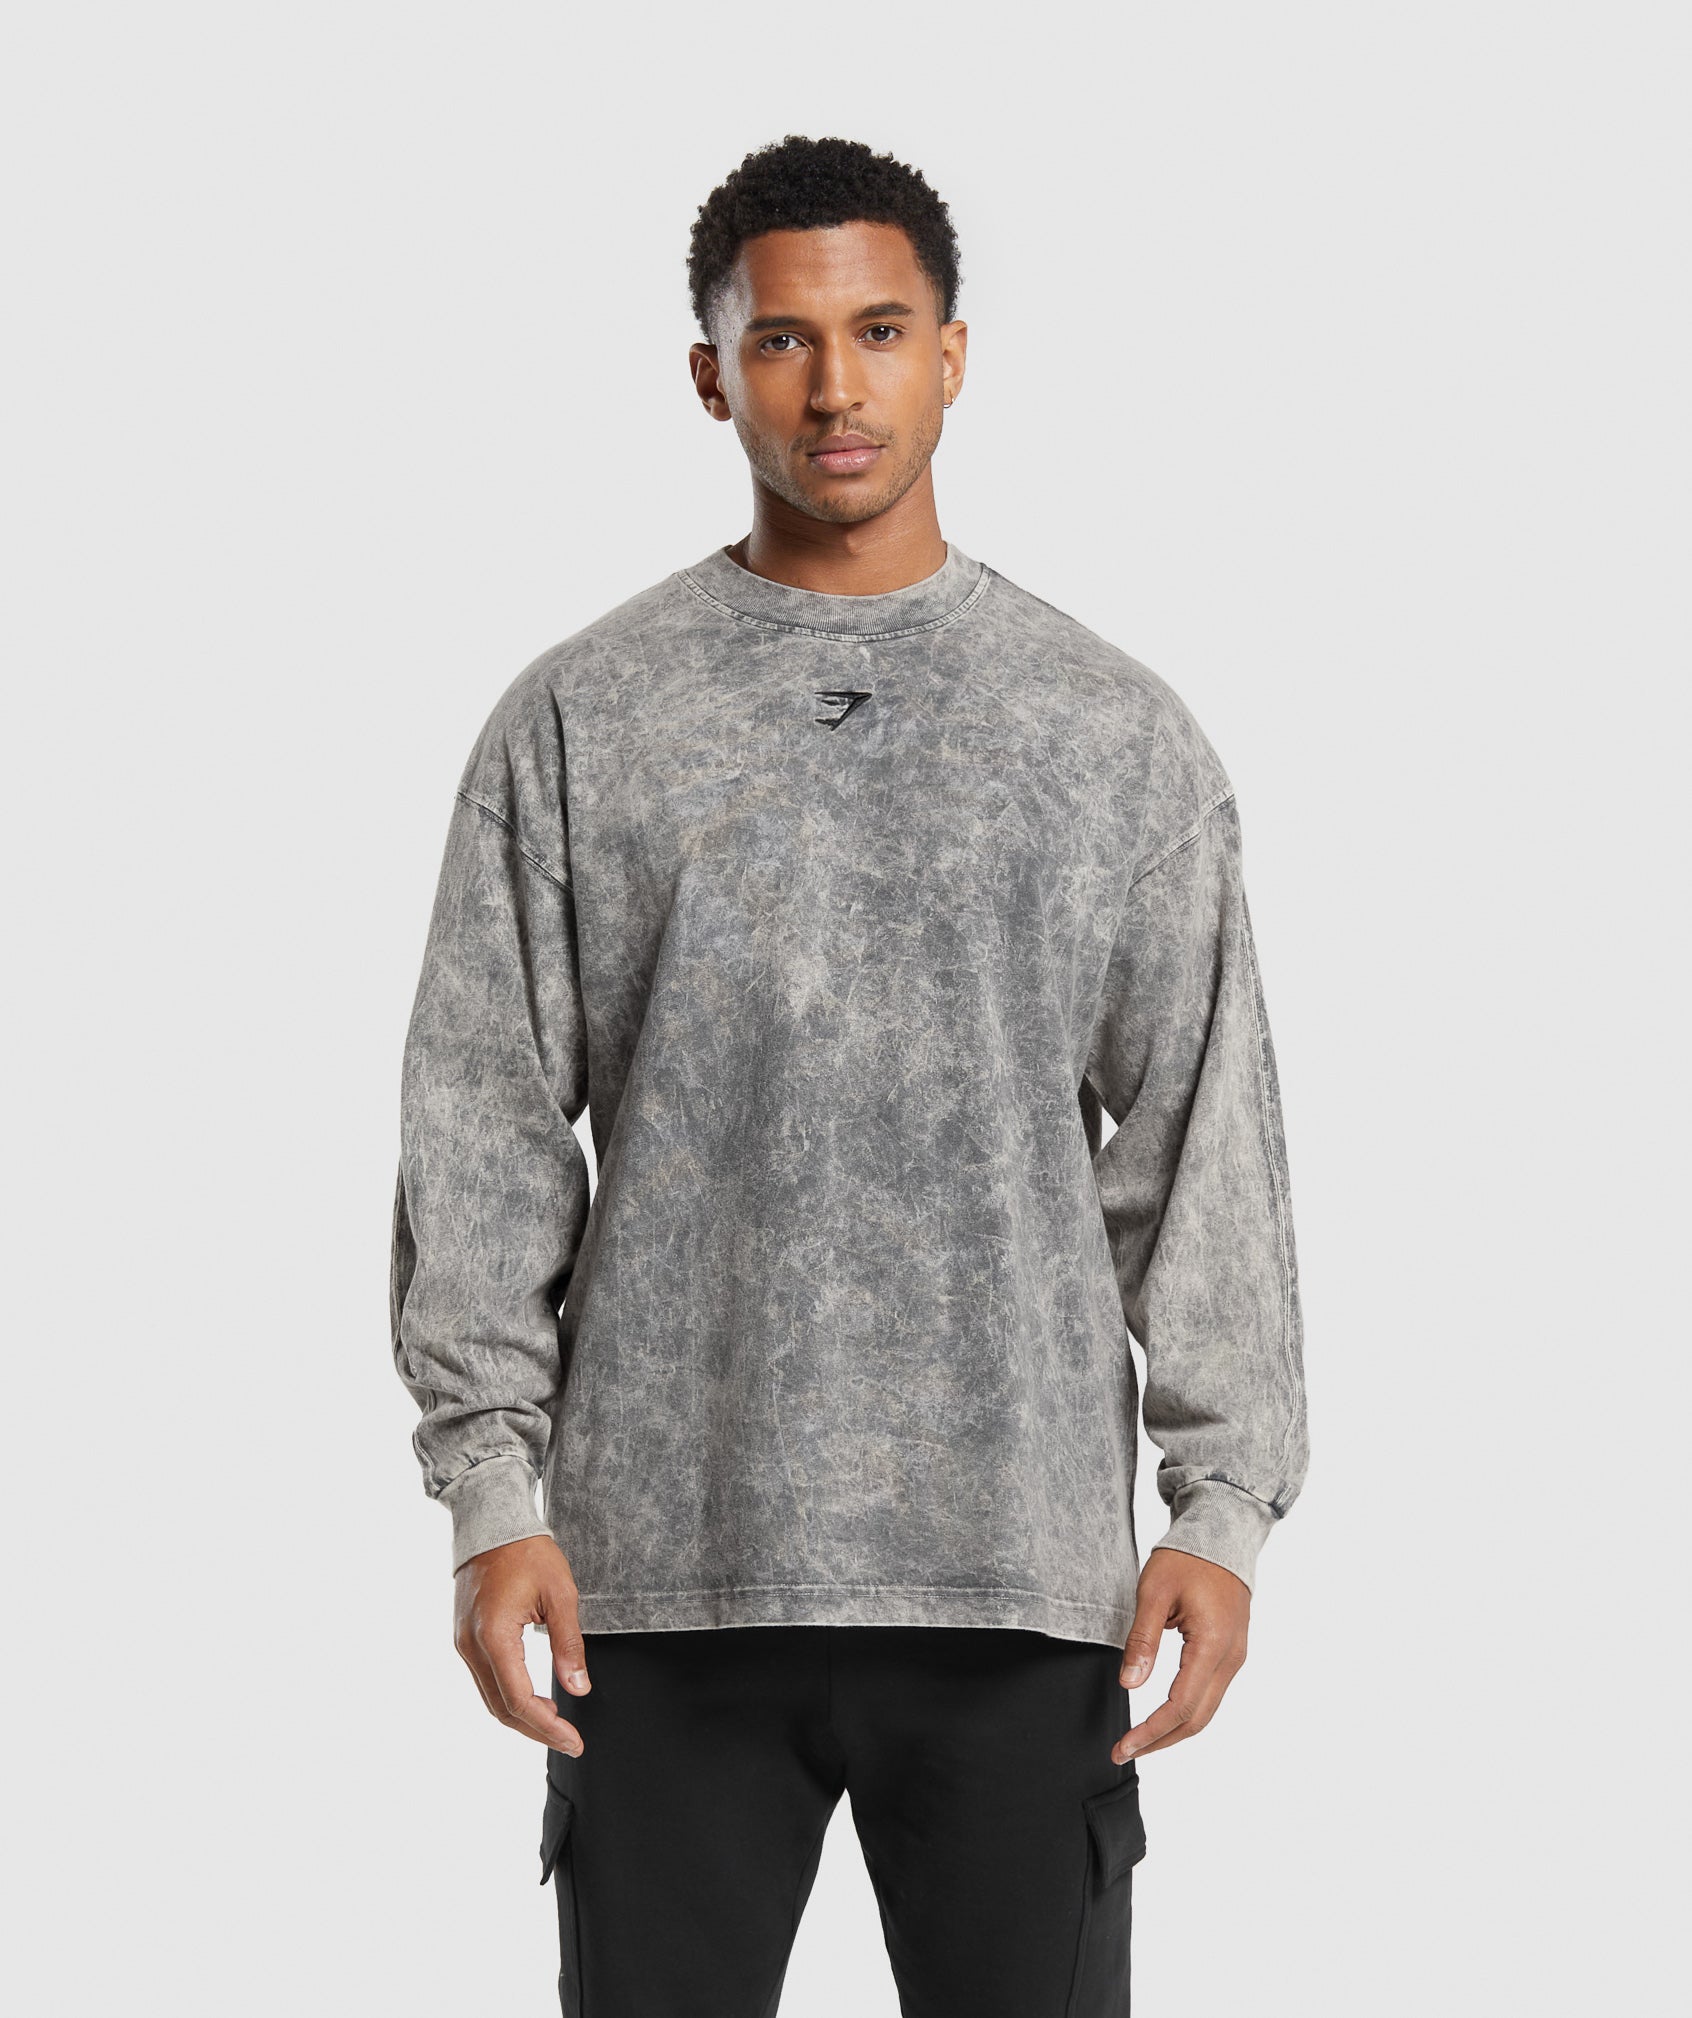 Rest Day Washed Long Sleeve T-Shirt in Black - view 1